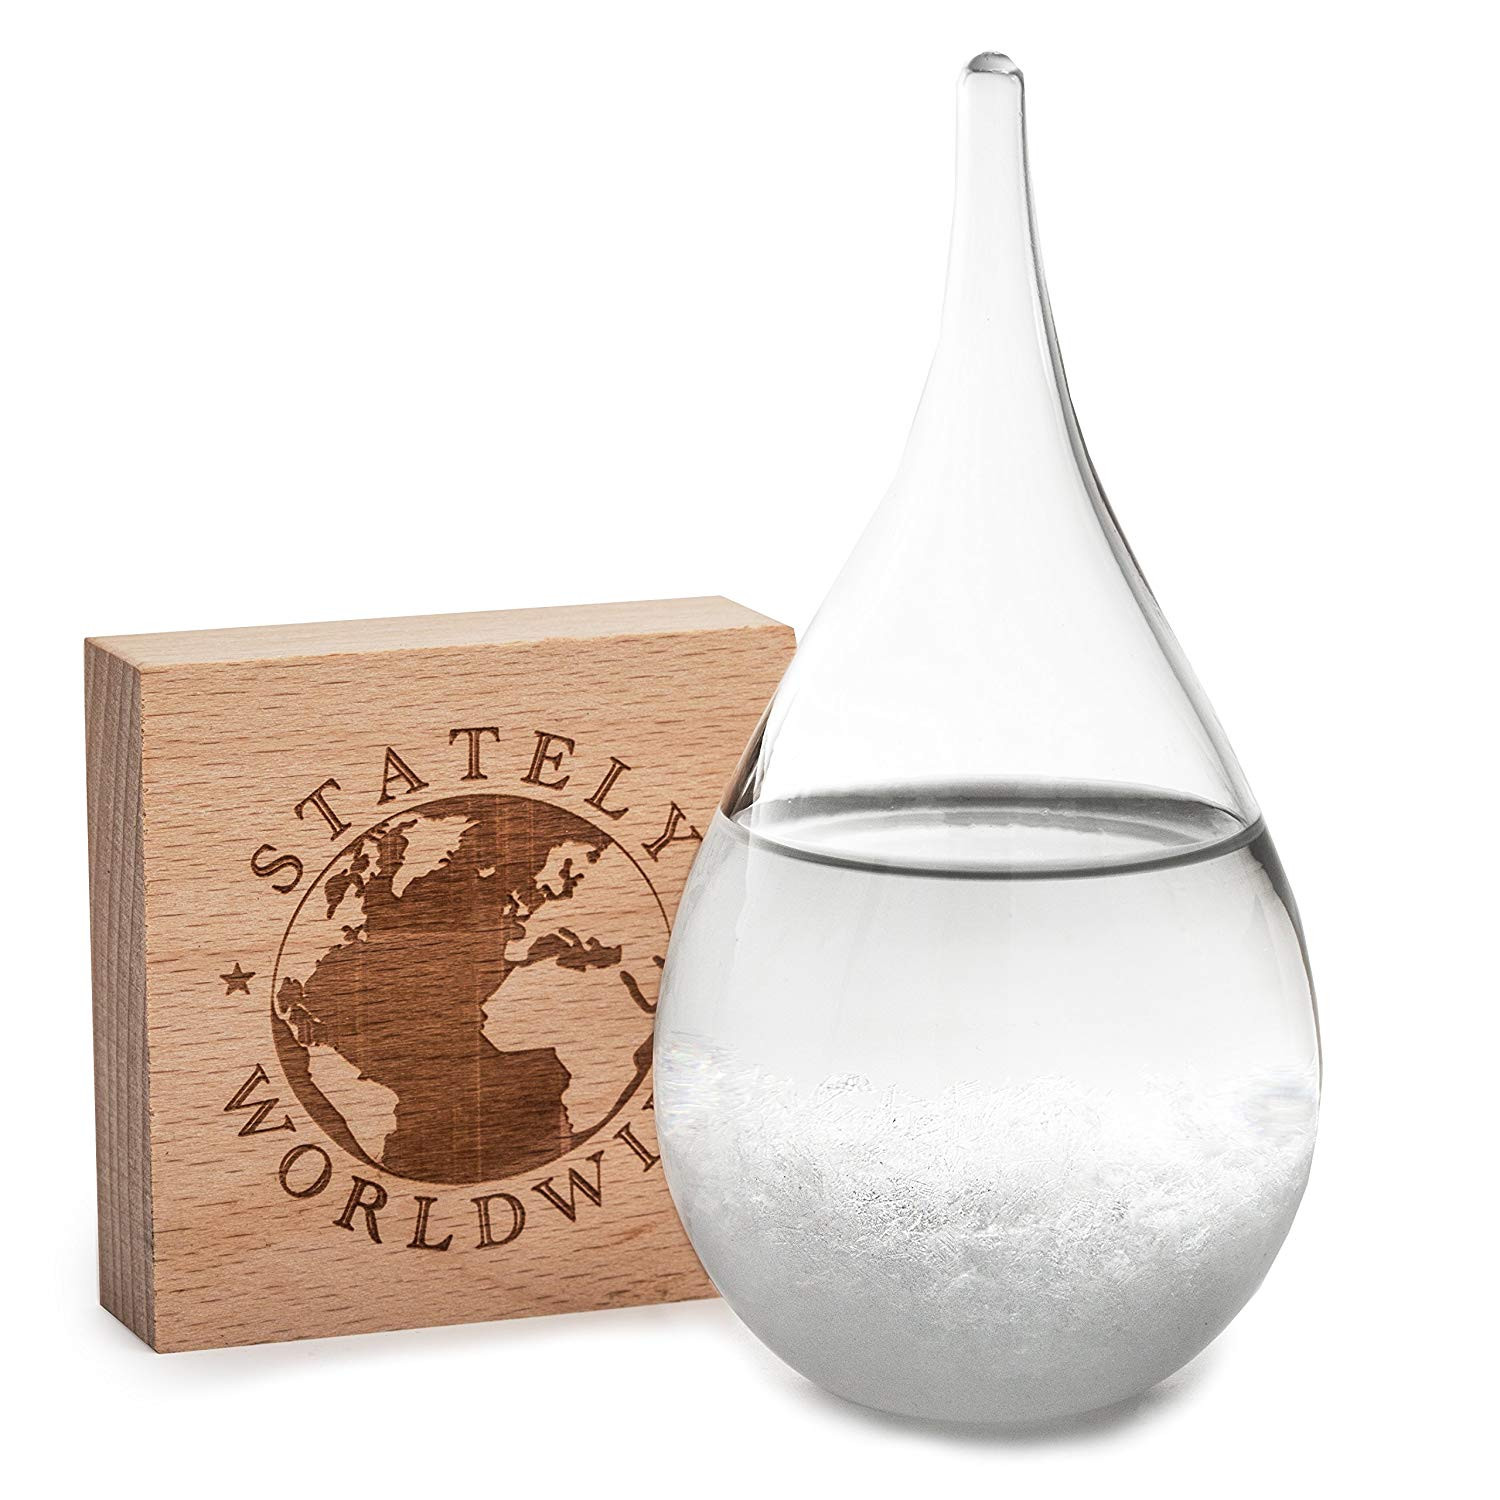 Extra Large Crystal Vase Of Amazon Com Storm Glass Weather Predictor Fitzroy Barometer Set with In Amazon Com Storm Glass Weather Predictor Fitzroy Barometer Set with Wood Base Calming Stylish Decorative Weather Bottle Beautiful Clear Glass Display